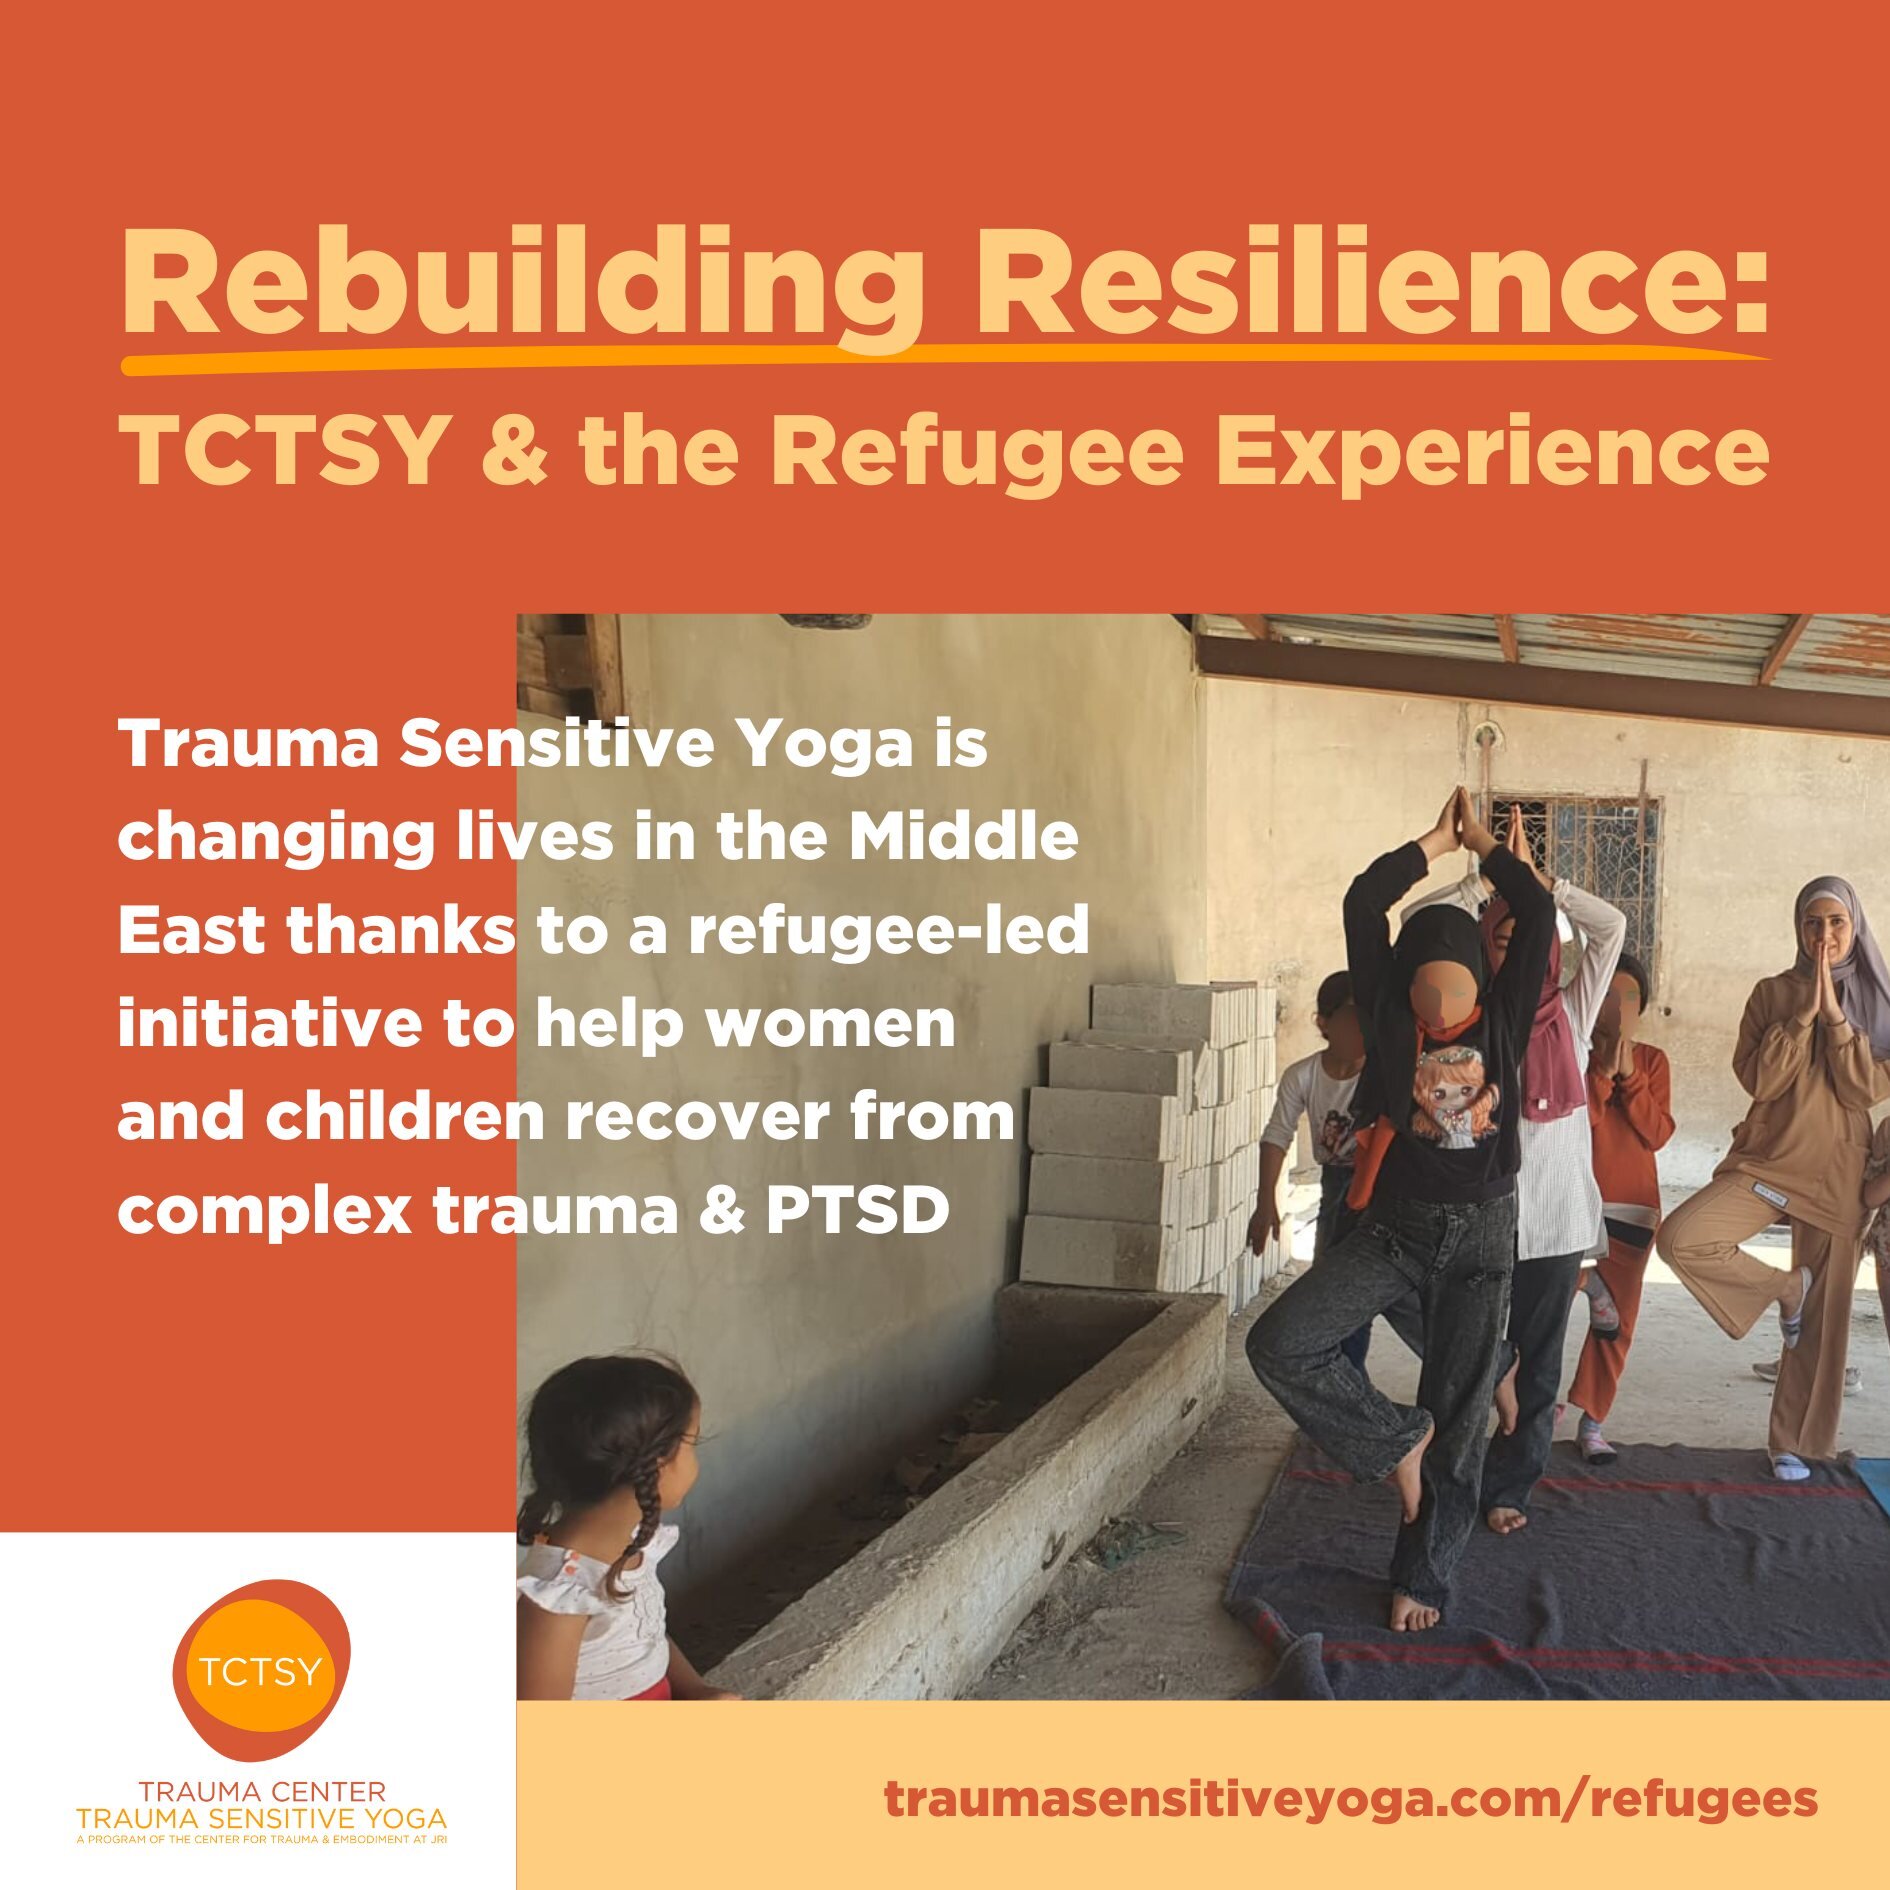 TCTSY &amp; the Refugee Experience

Trauma Sensitive Yoga is changing lives in the Middle East

Refugee TCTSY Community Leaders from Syria and Palestine are working to restore a sense of safety and agency for women and children living in United Natio